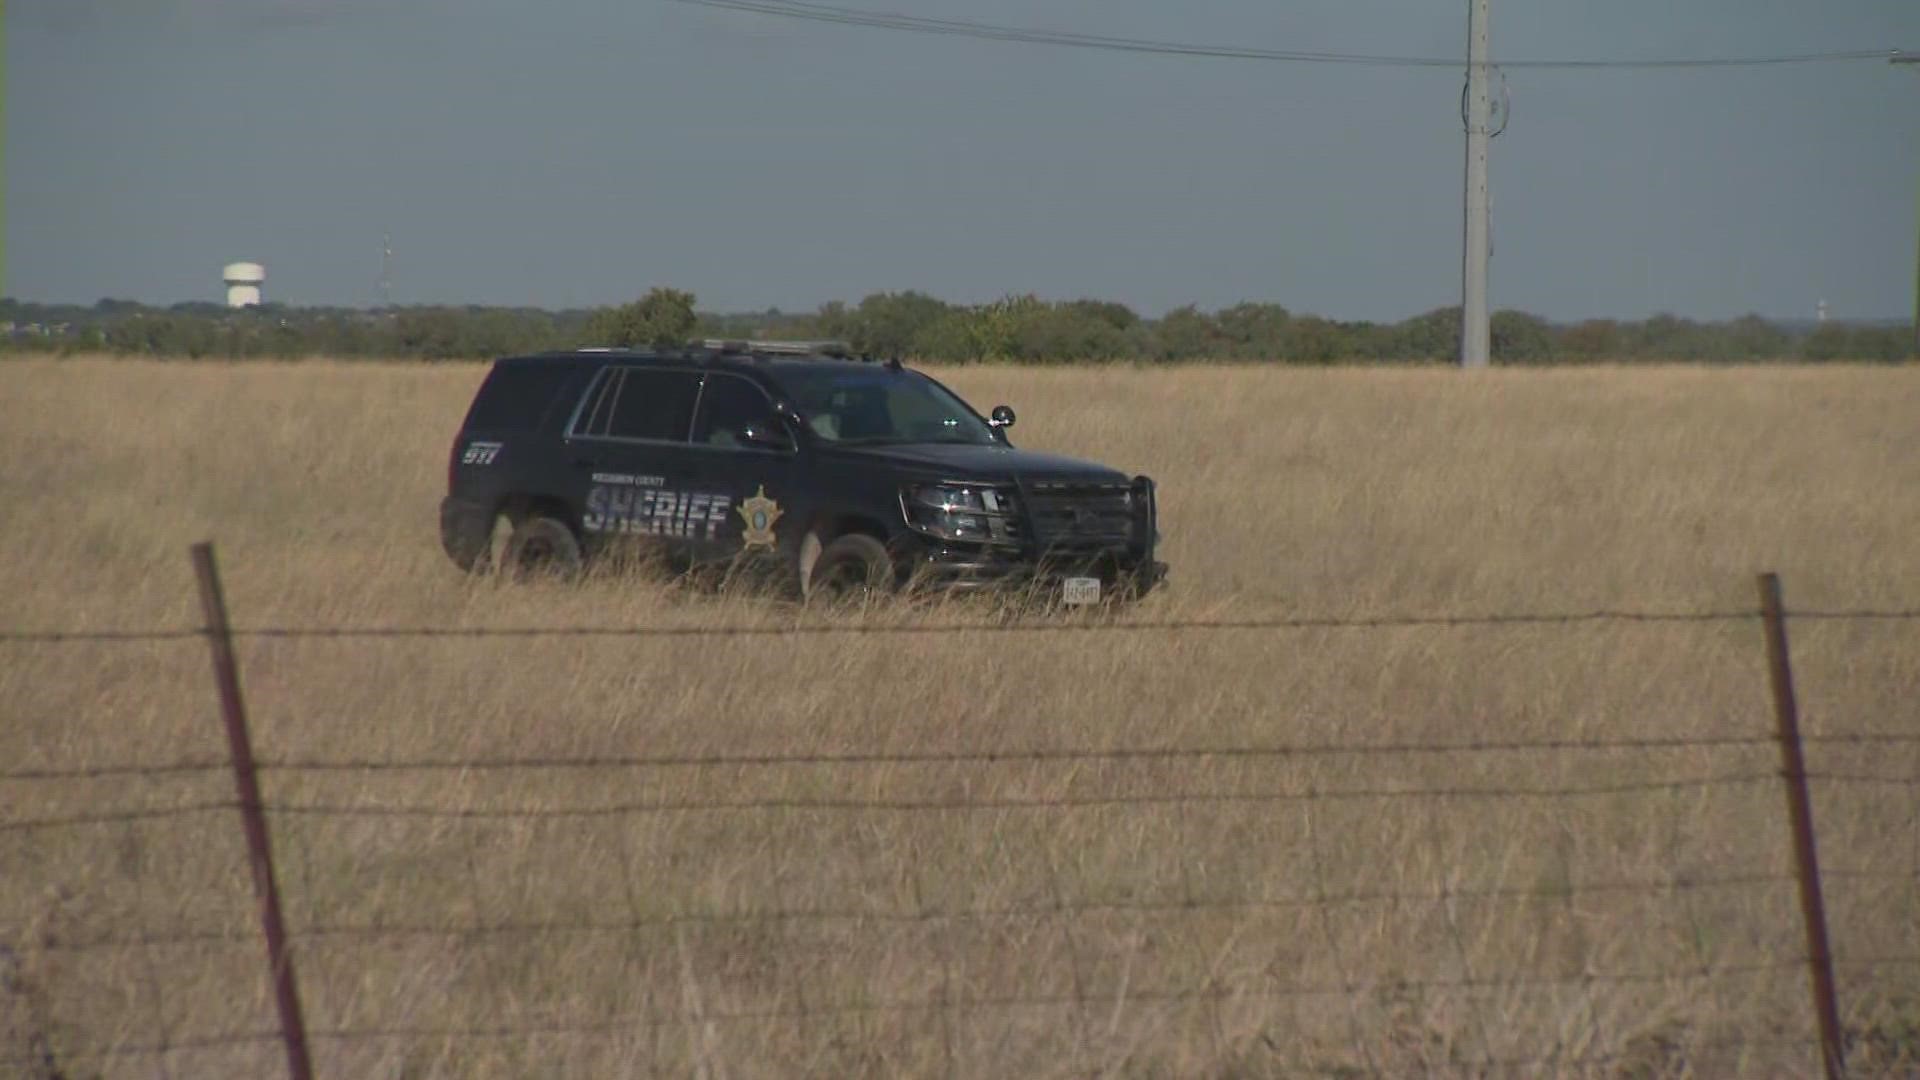 Williamson County authorities are investigating after the discovery of skeletal human remains. The cause of death is unclear at this time.